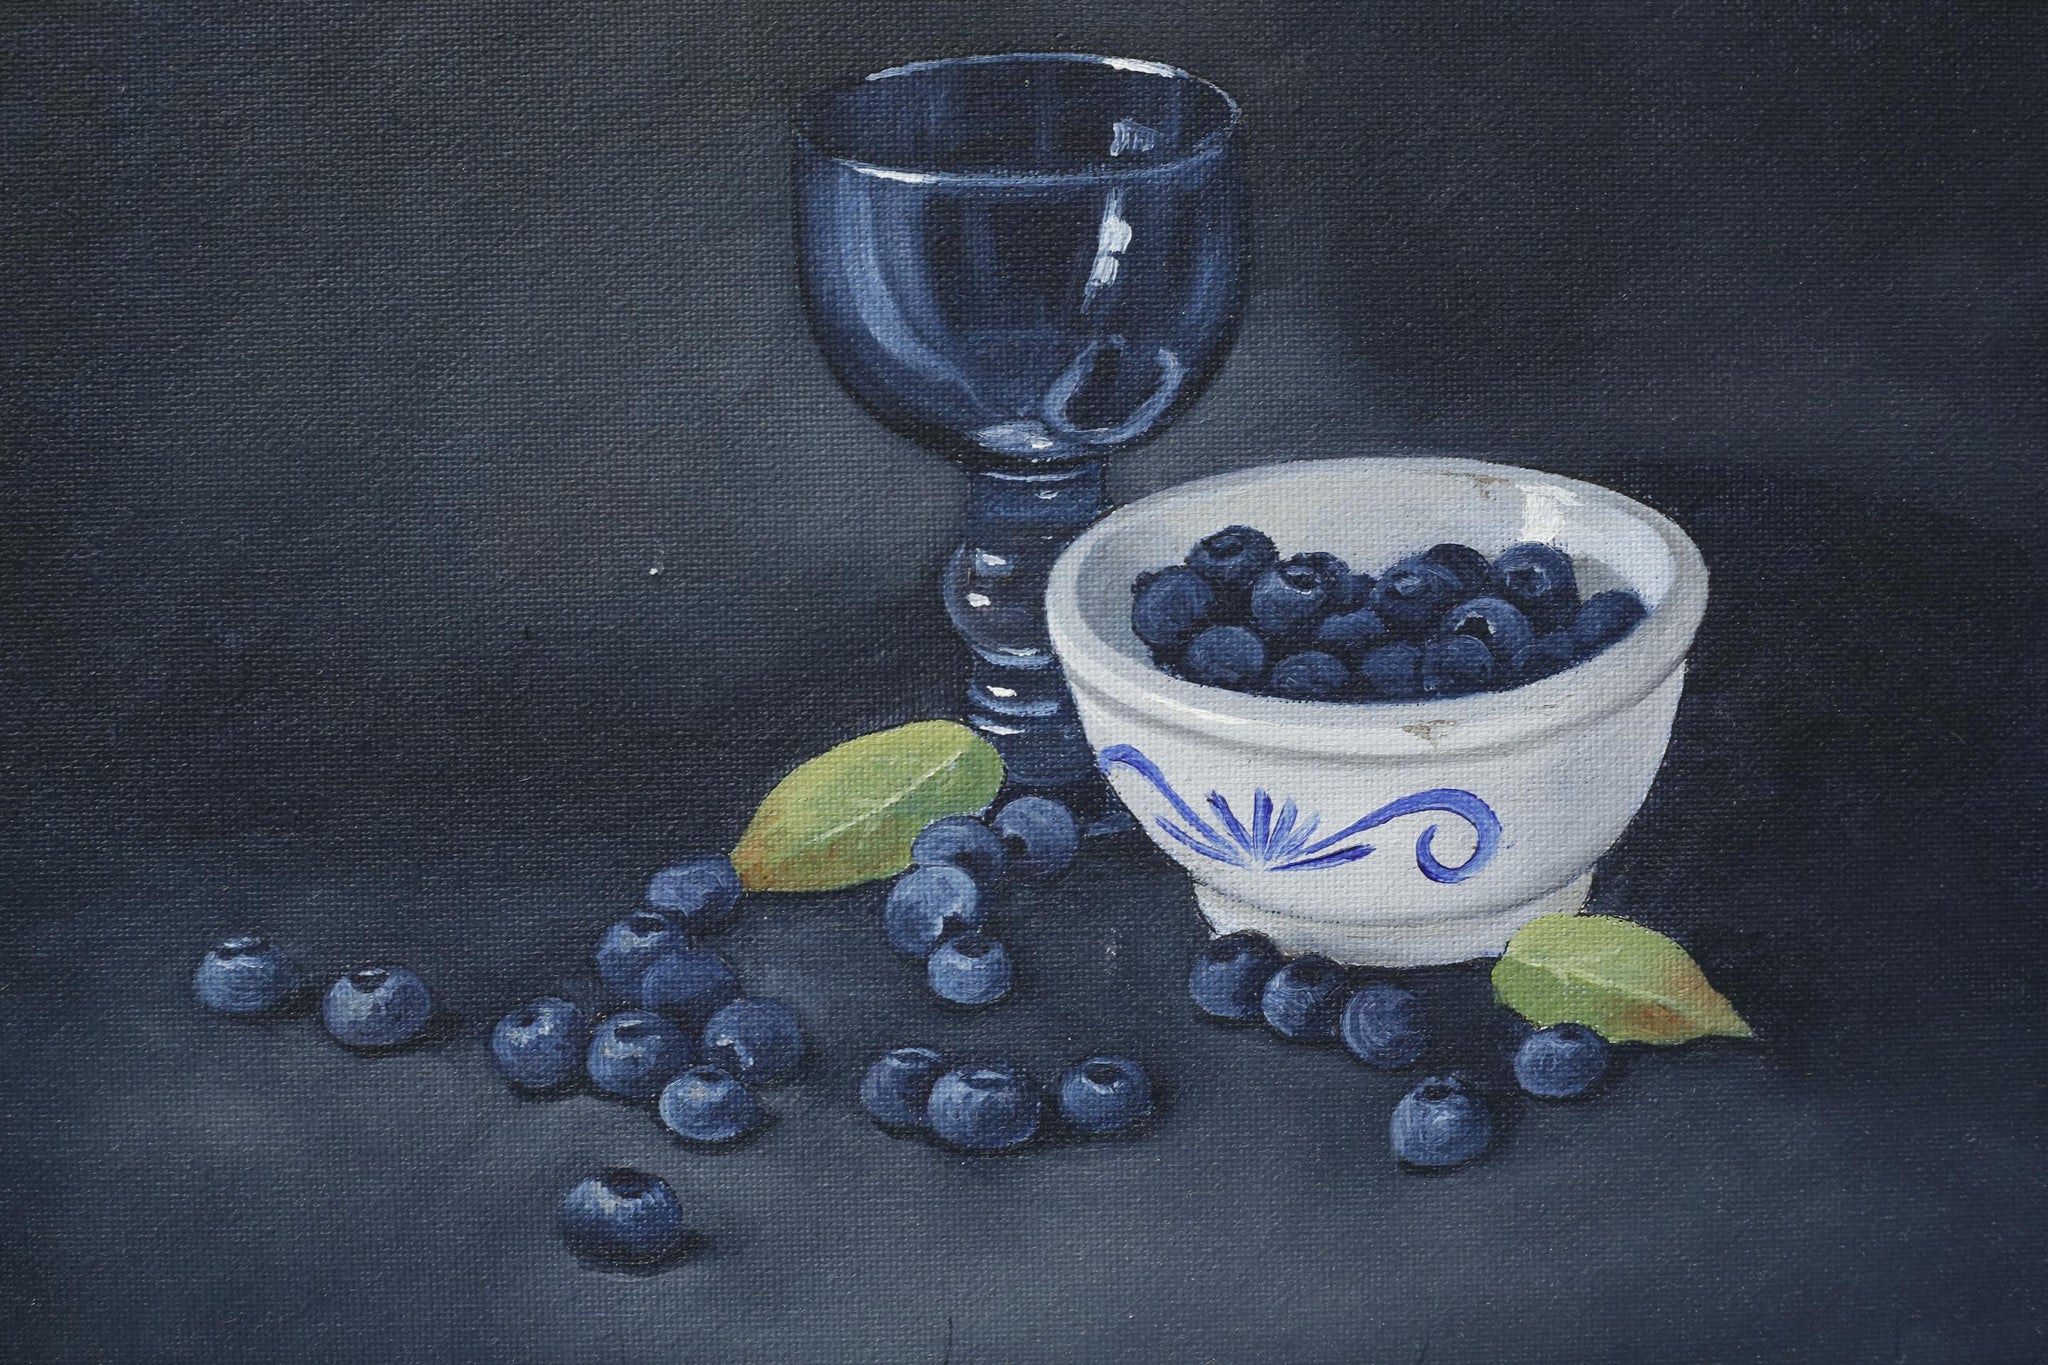 20th century blue glass and berry still life painting